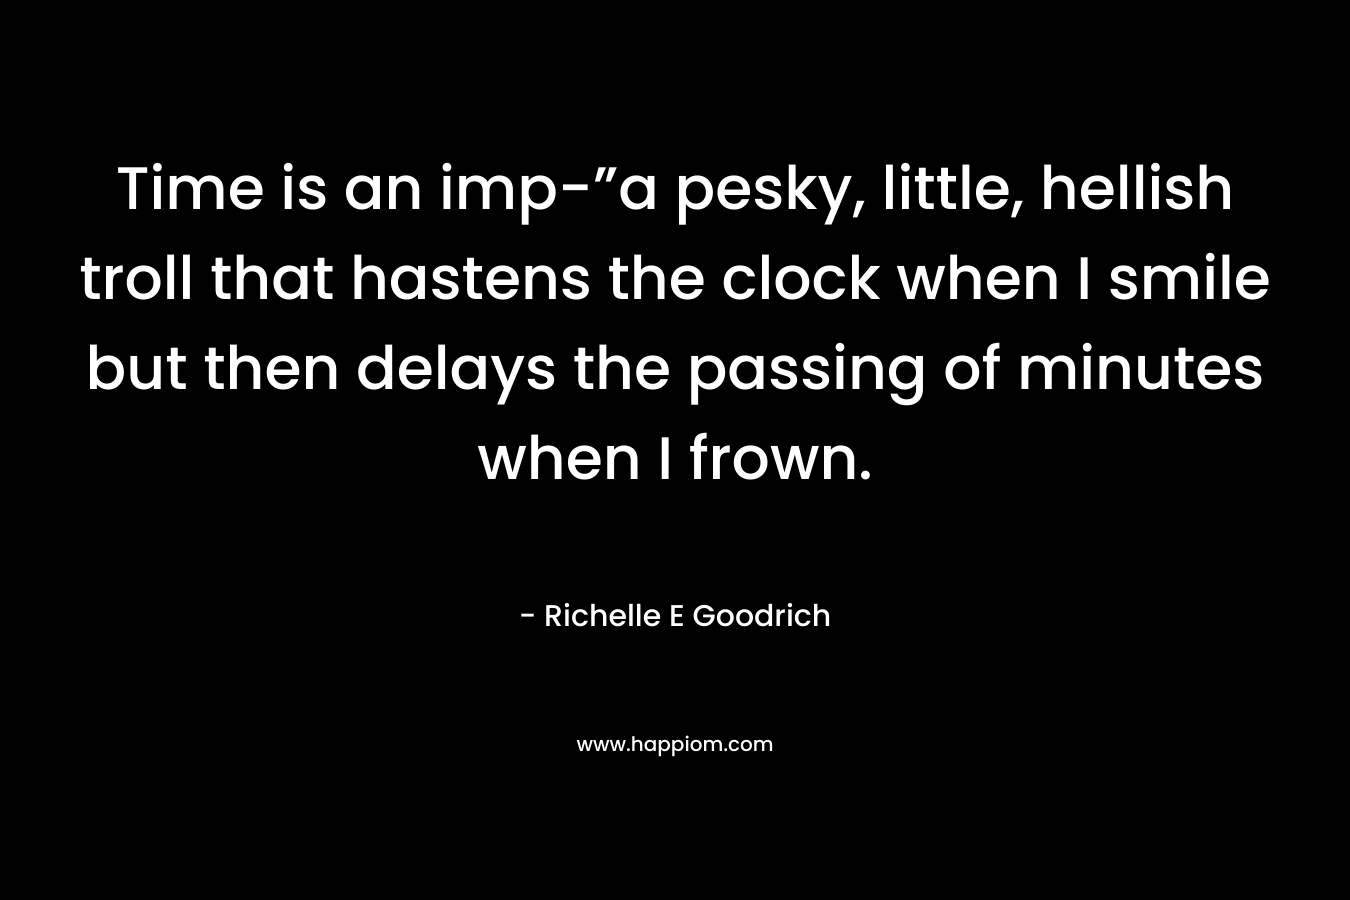 Time is an imp-”a pesky, little, hellish troll that hastens the clock when I smile but then delays the passing of minutes when I frown. – Richelle E Goodrich